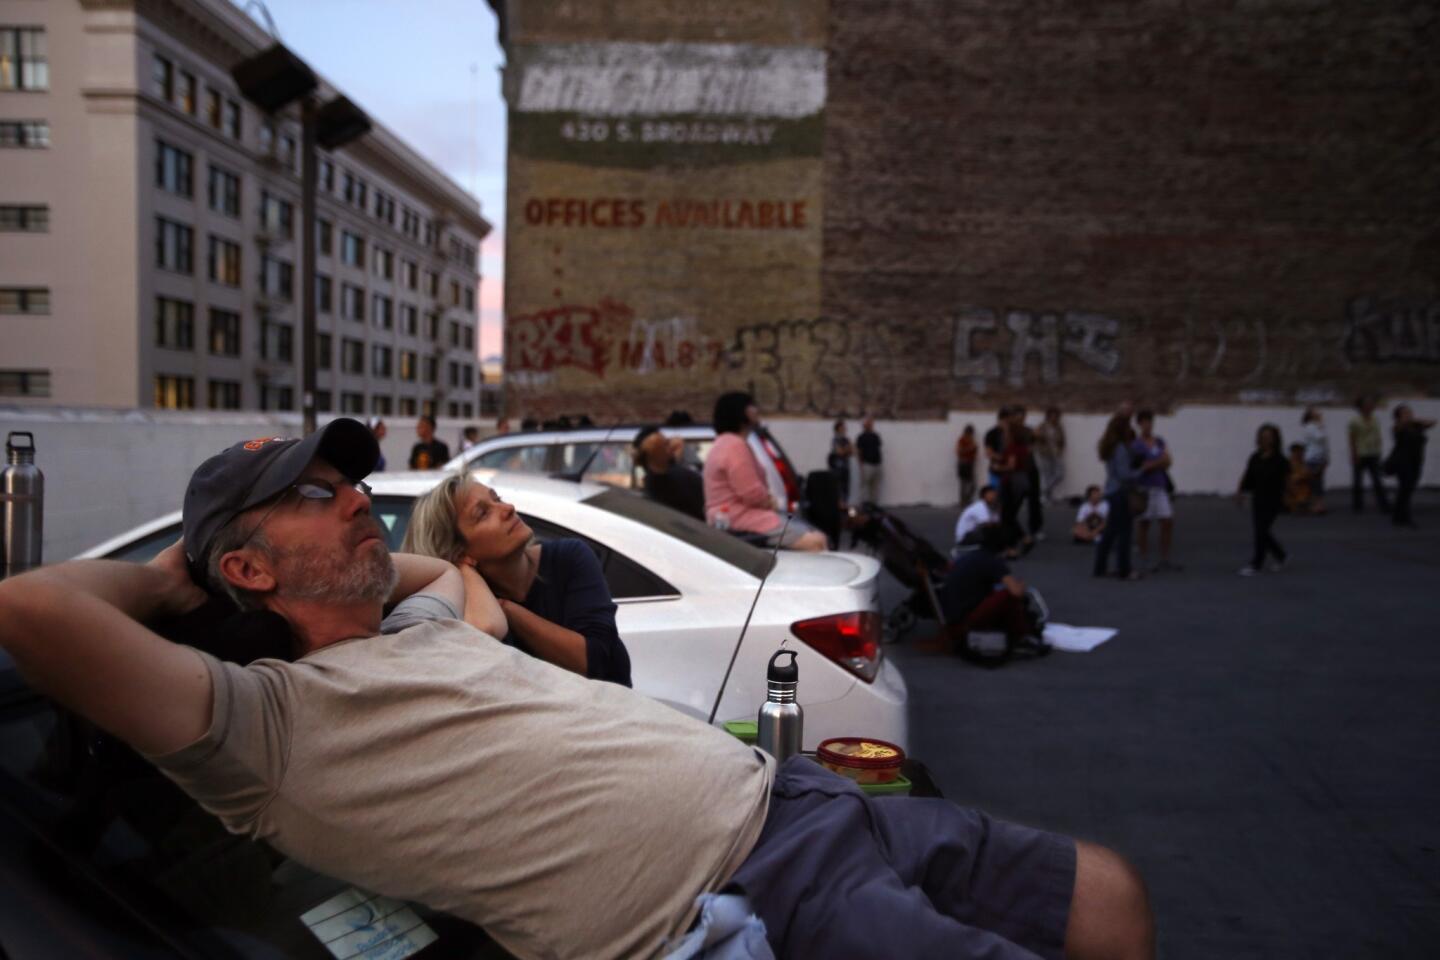 John Short, left, and his wife Mary Beth joined around 50 people who gathered on top of a parking garage to watch dozens of Vaux's swifts swarm before bedding down for the night in a chimney on top of a building at 5th Street and Broadway in downtown Los Angeles on Friday.